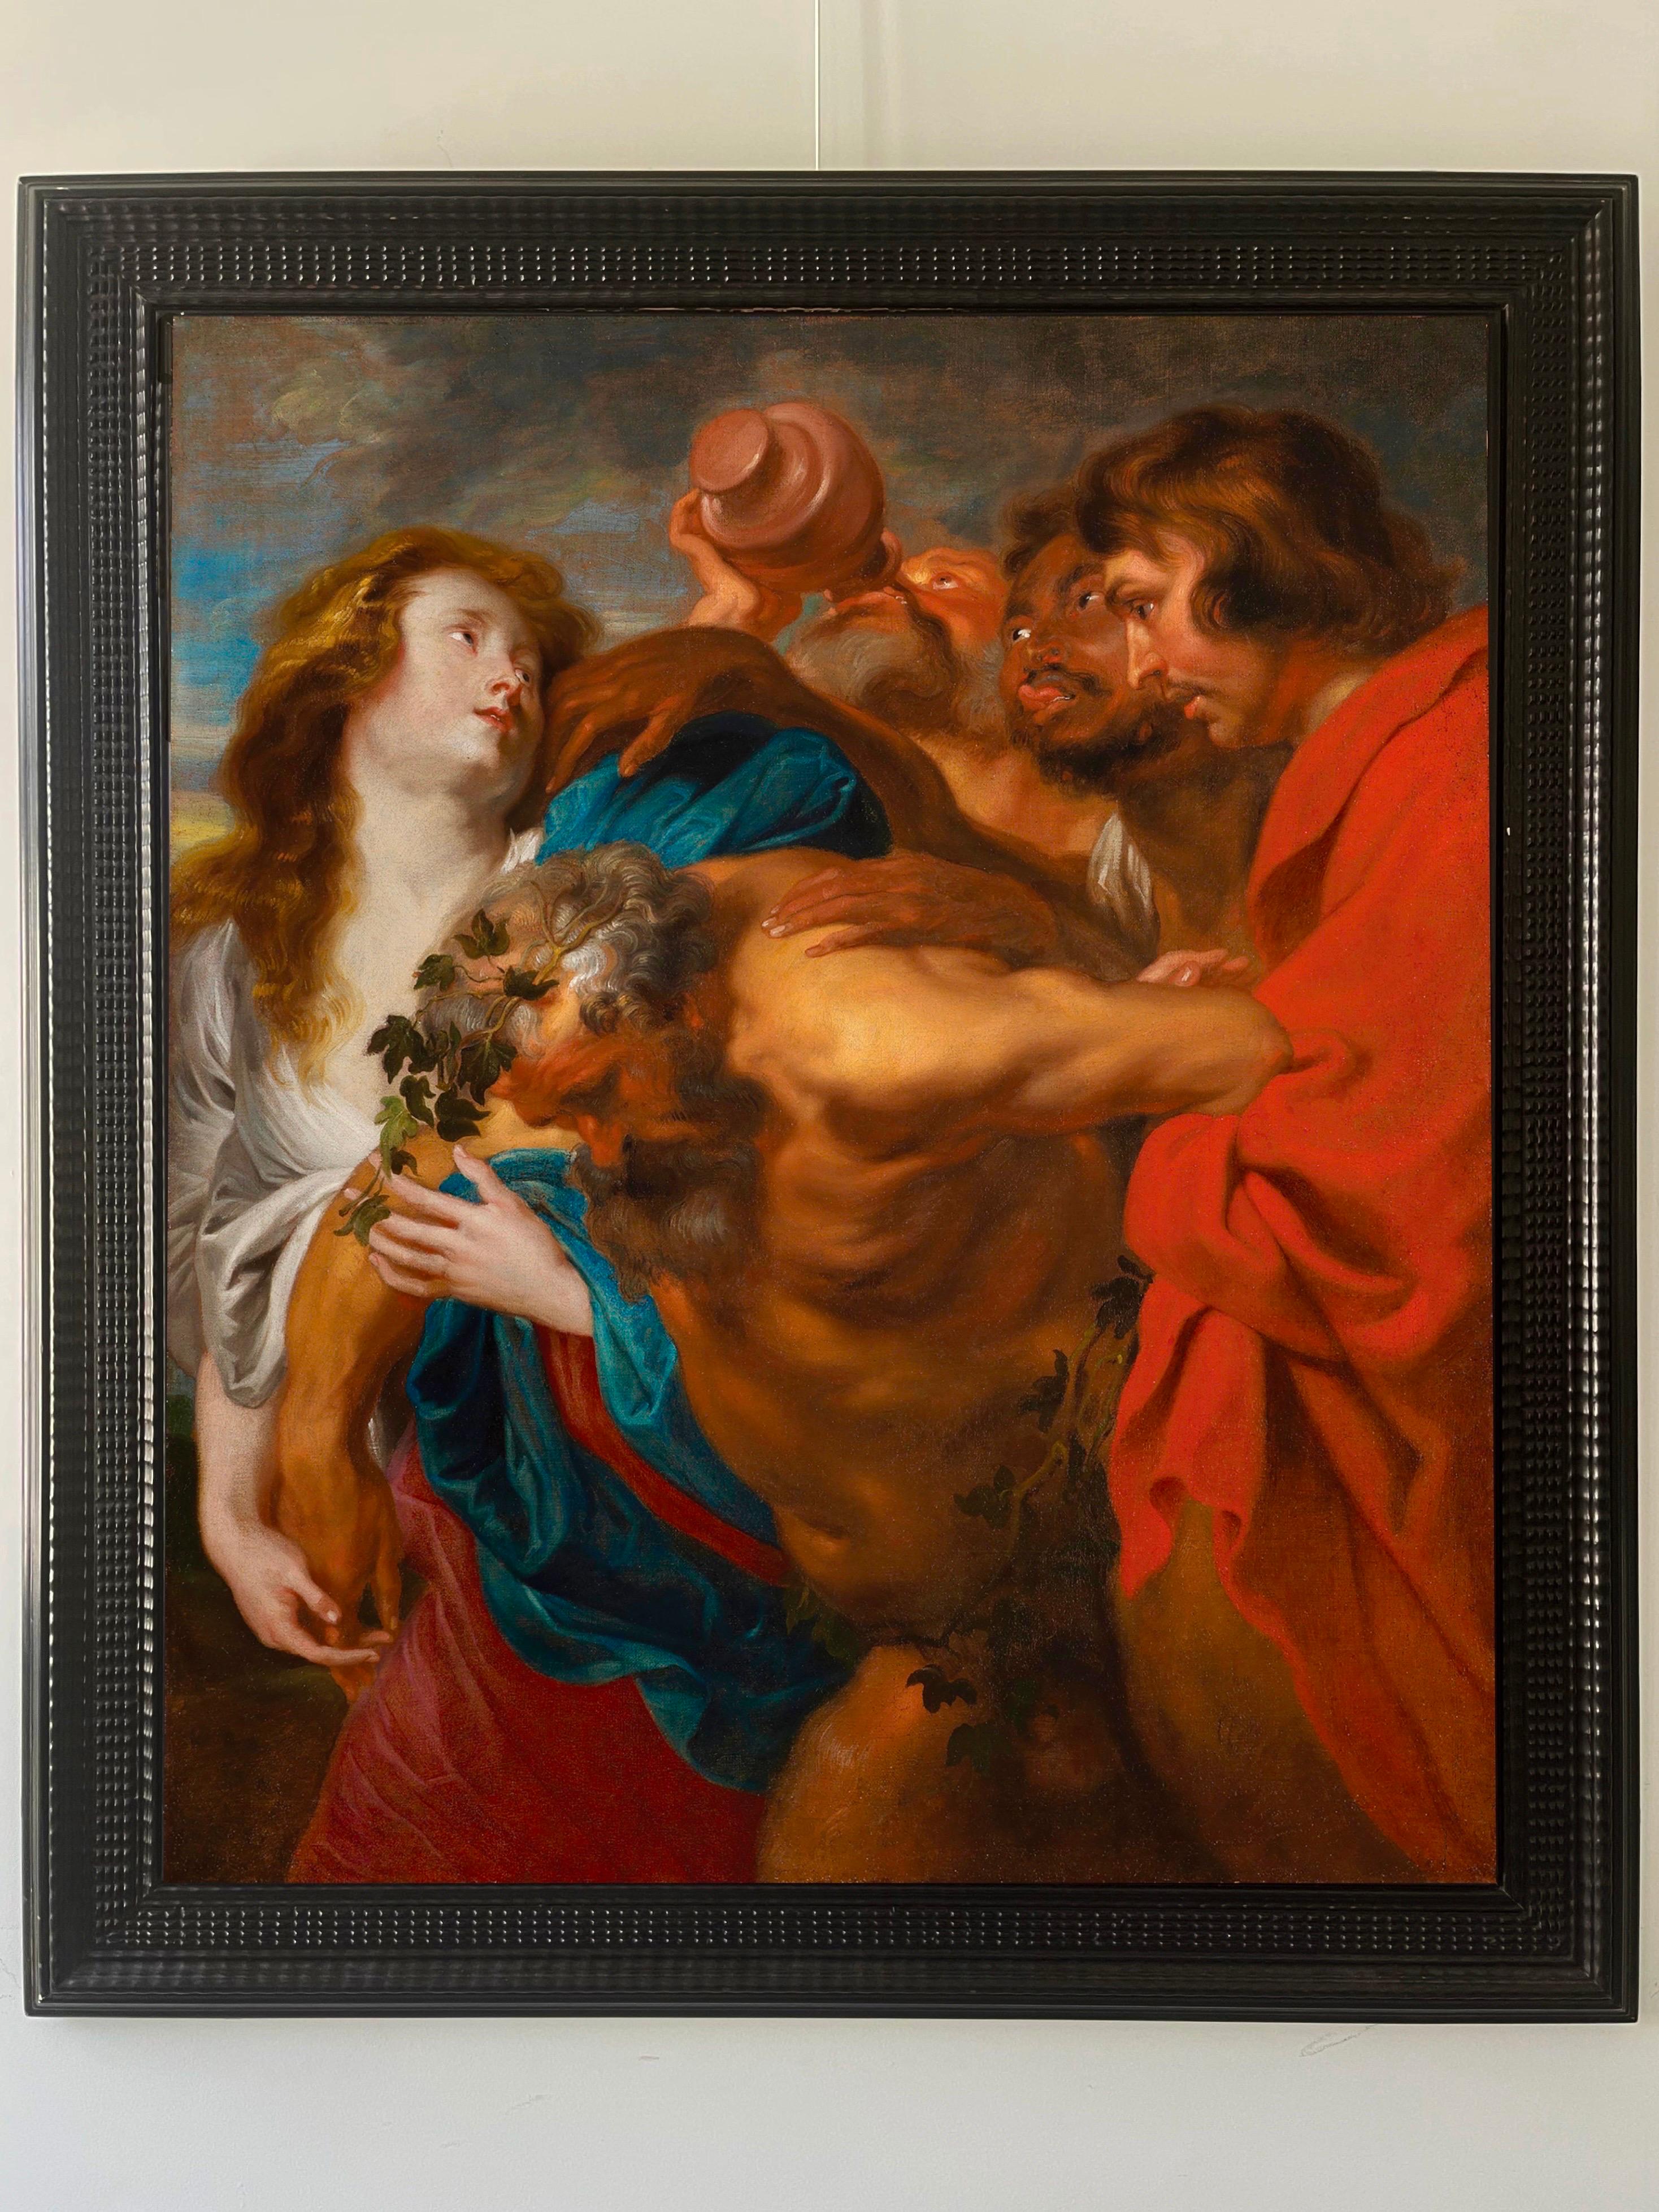 17th century Flemish Old master - Silenus feasting - Wine God - Painting by Studio of Anthony Van Dyck